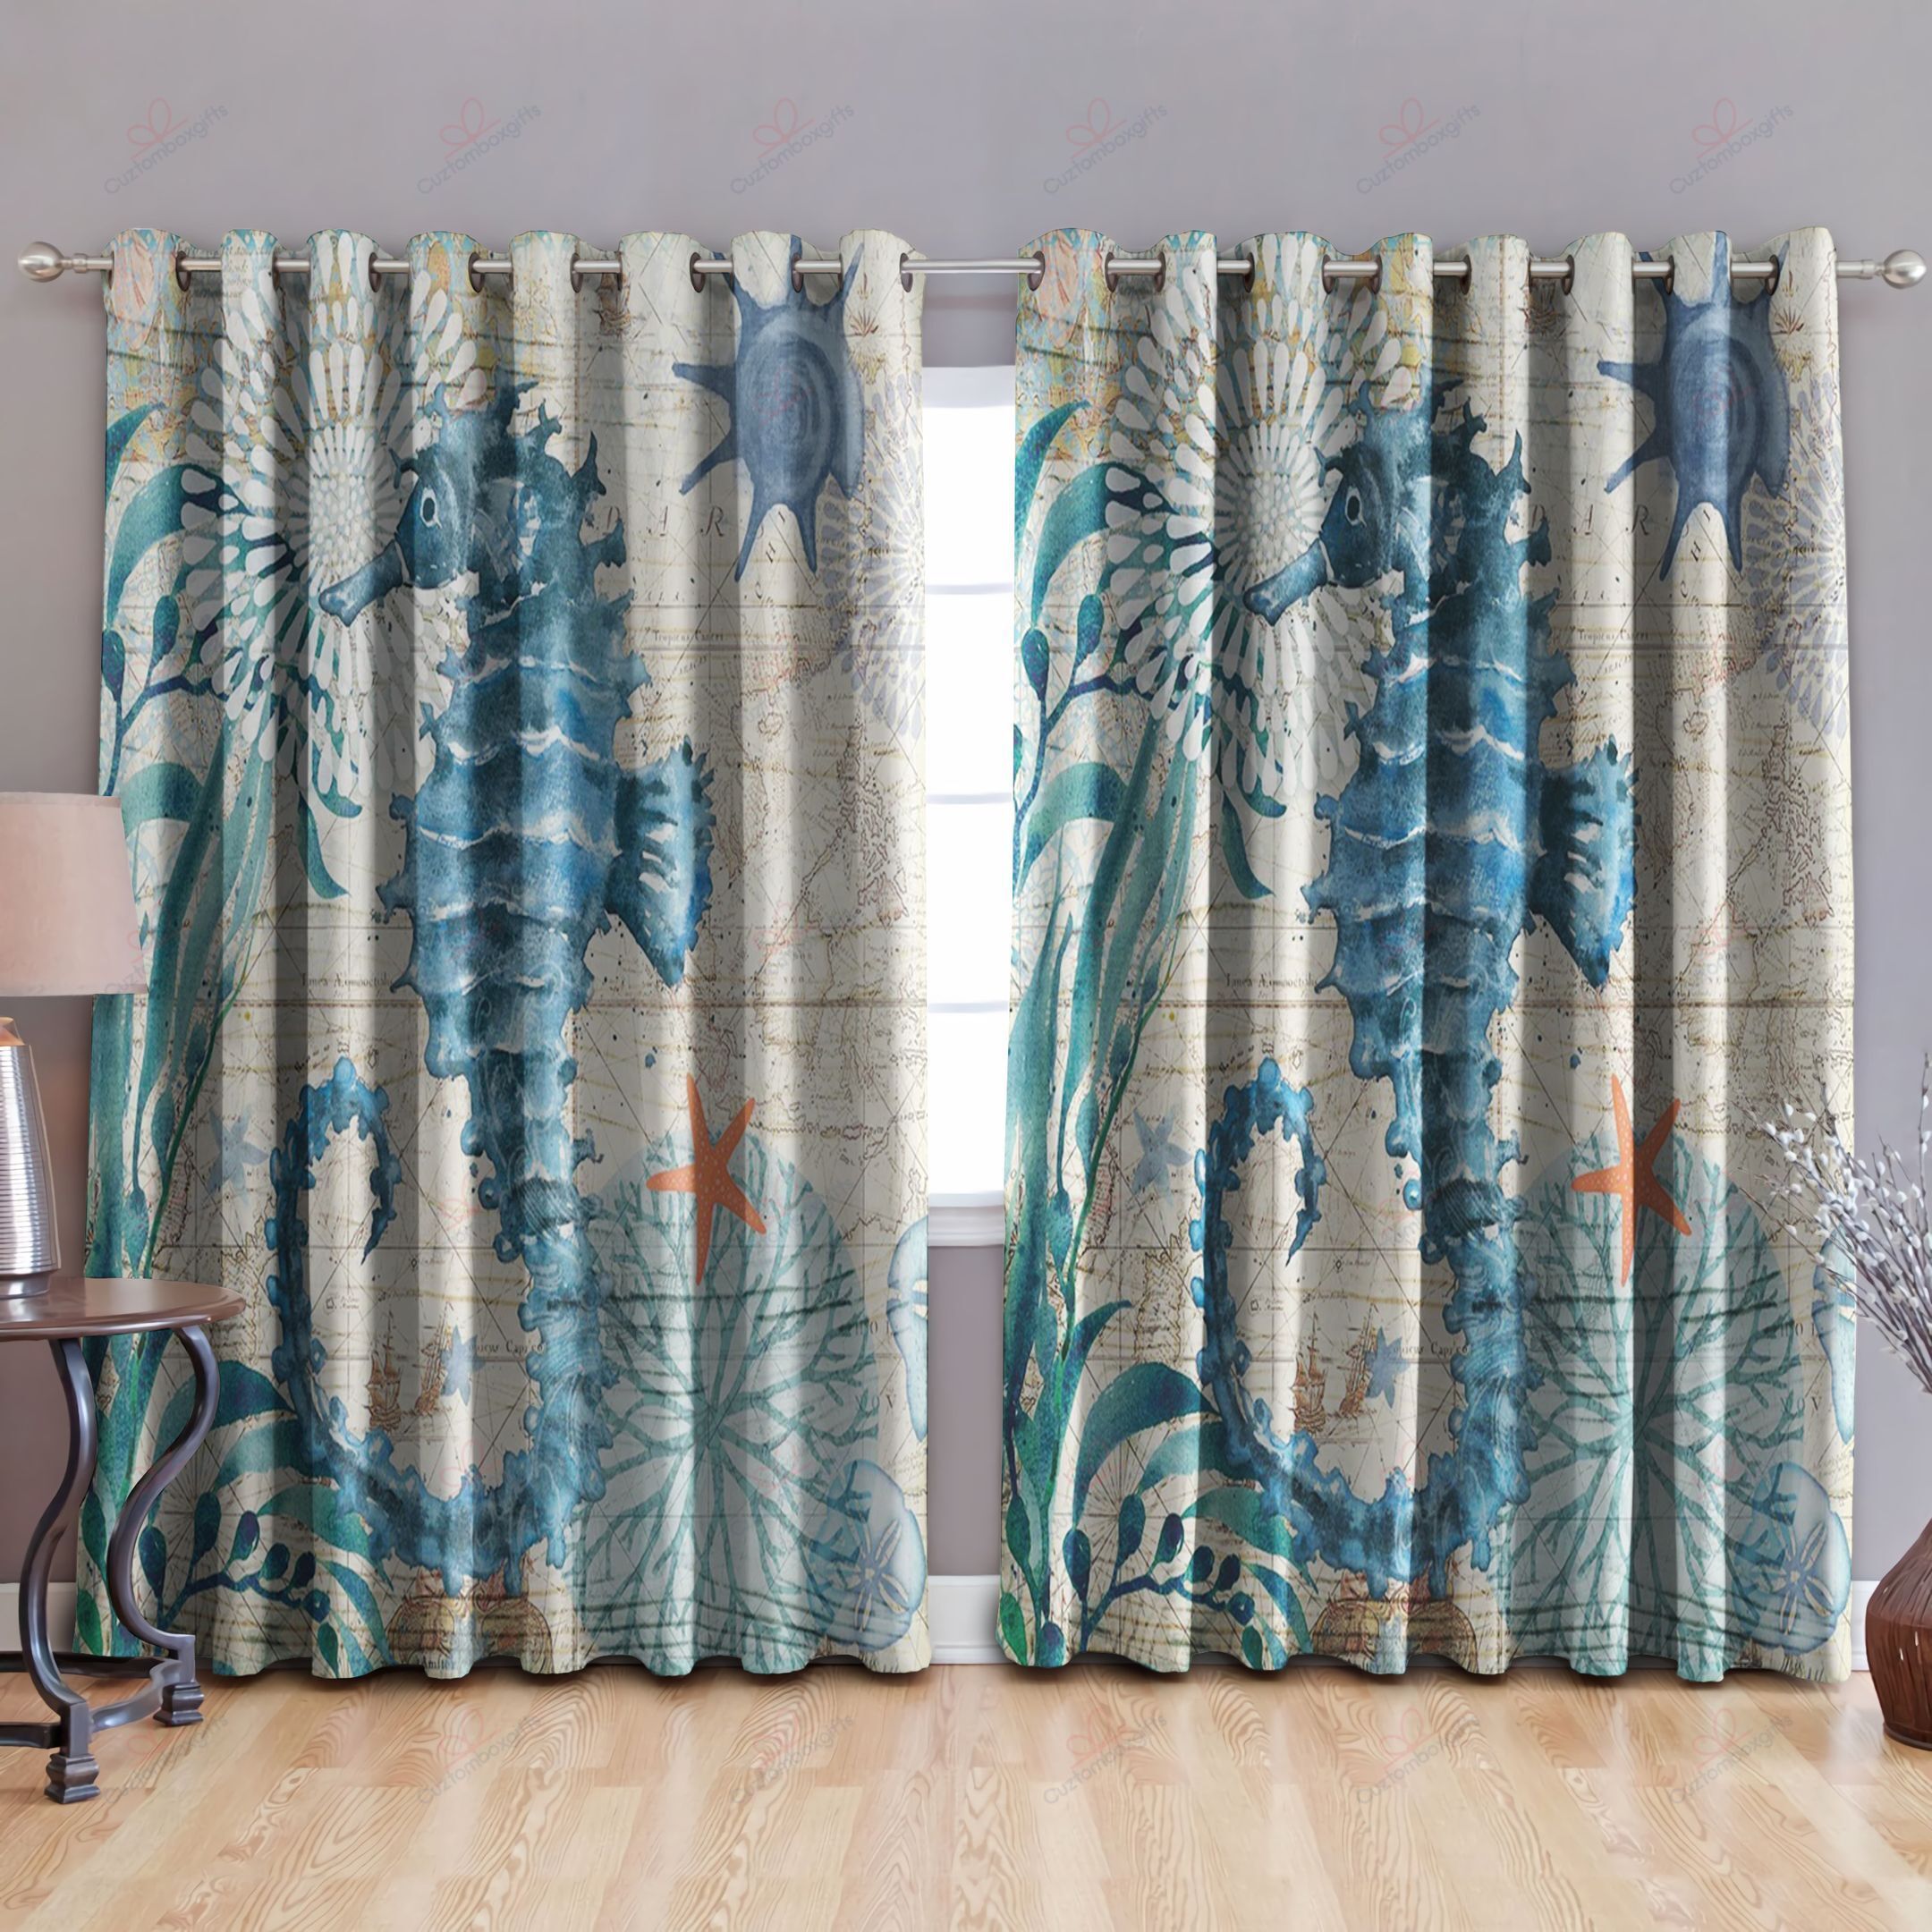 Seahorse Blue And White Printed Window Curtain Home Decor